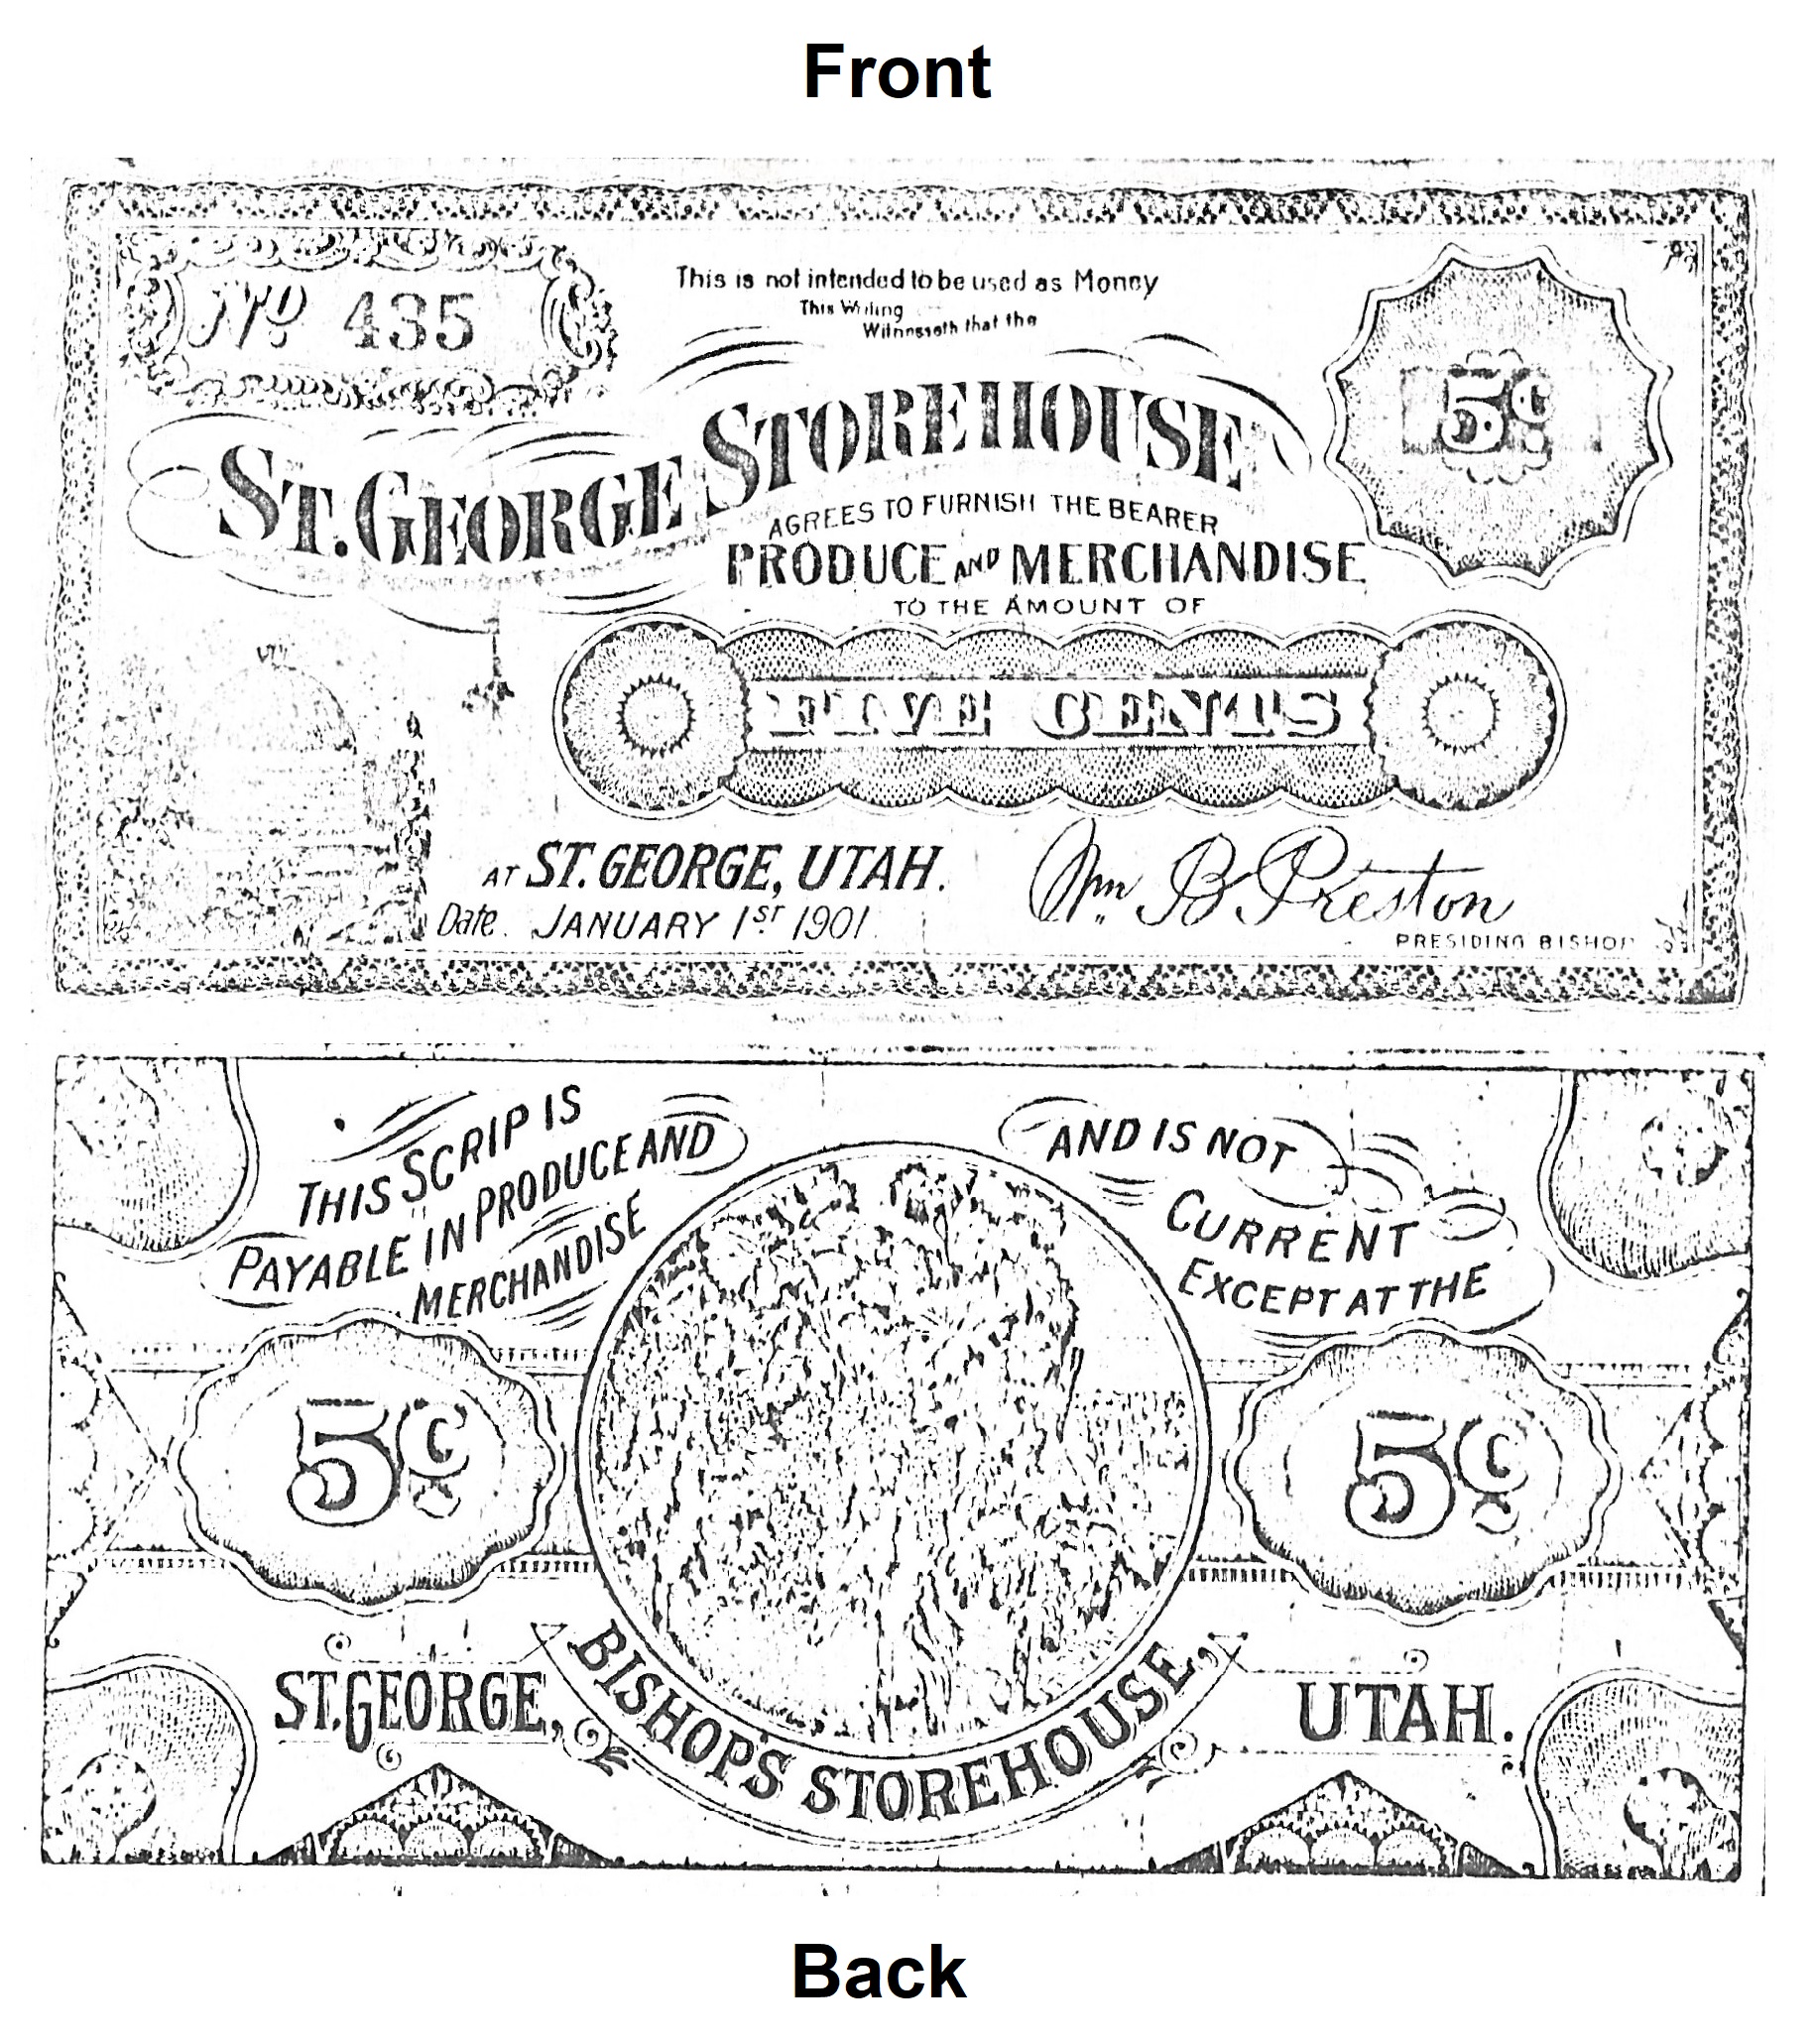 st-george-storehouse-currency0.jpg